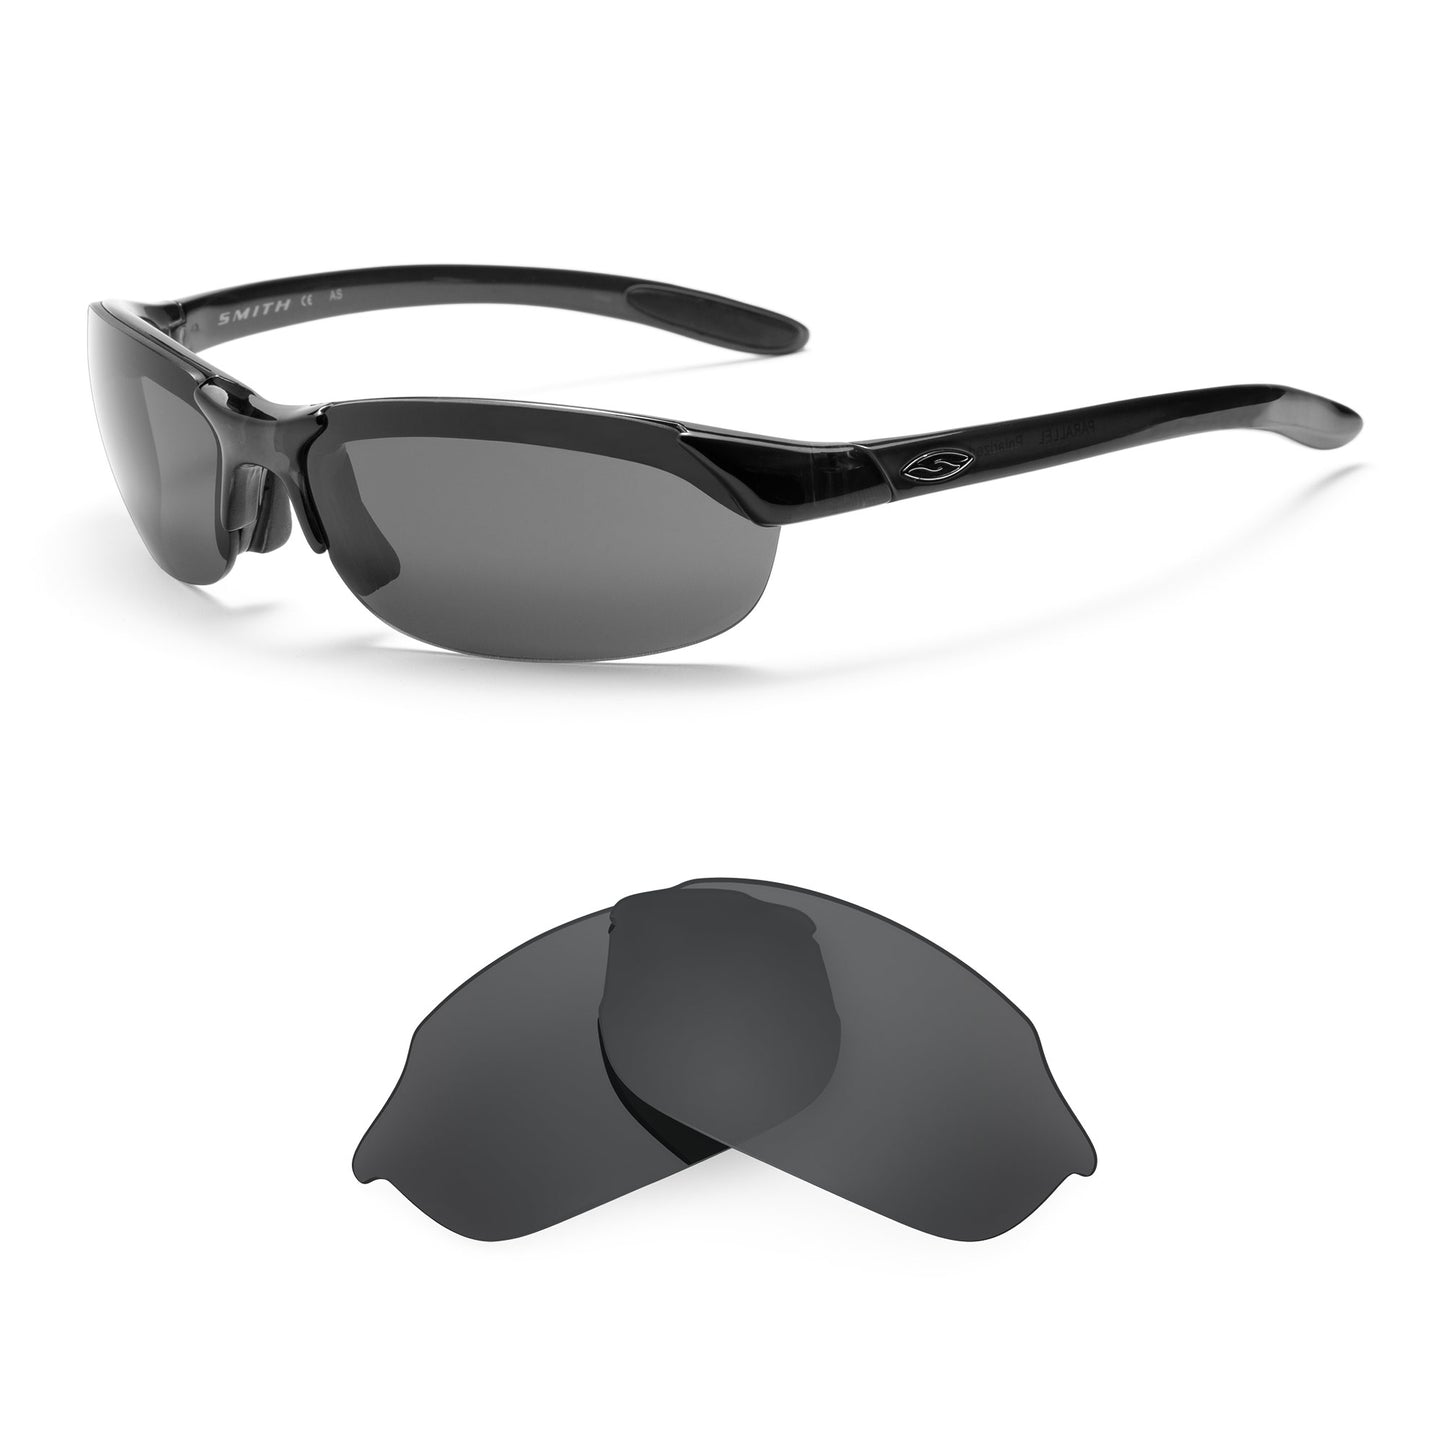 Smith Parallel sunglasses with replacement lenses